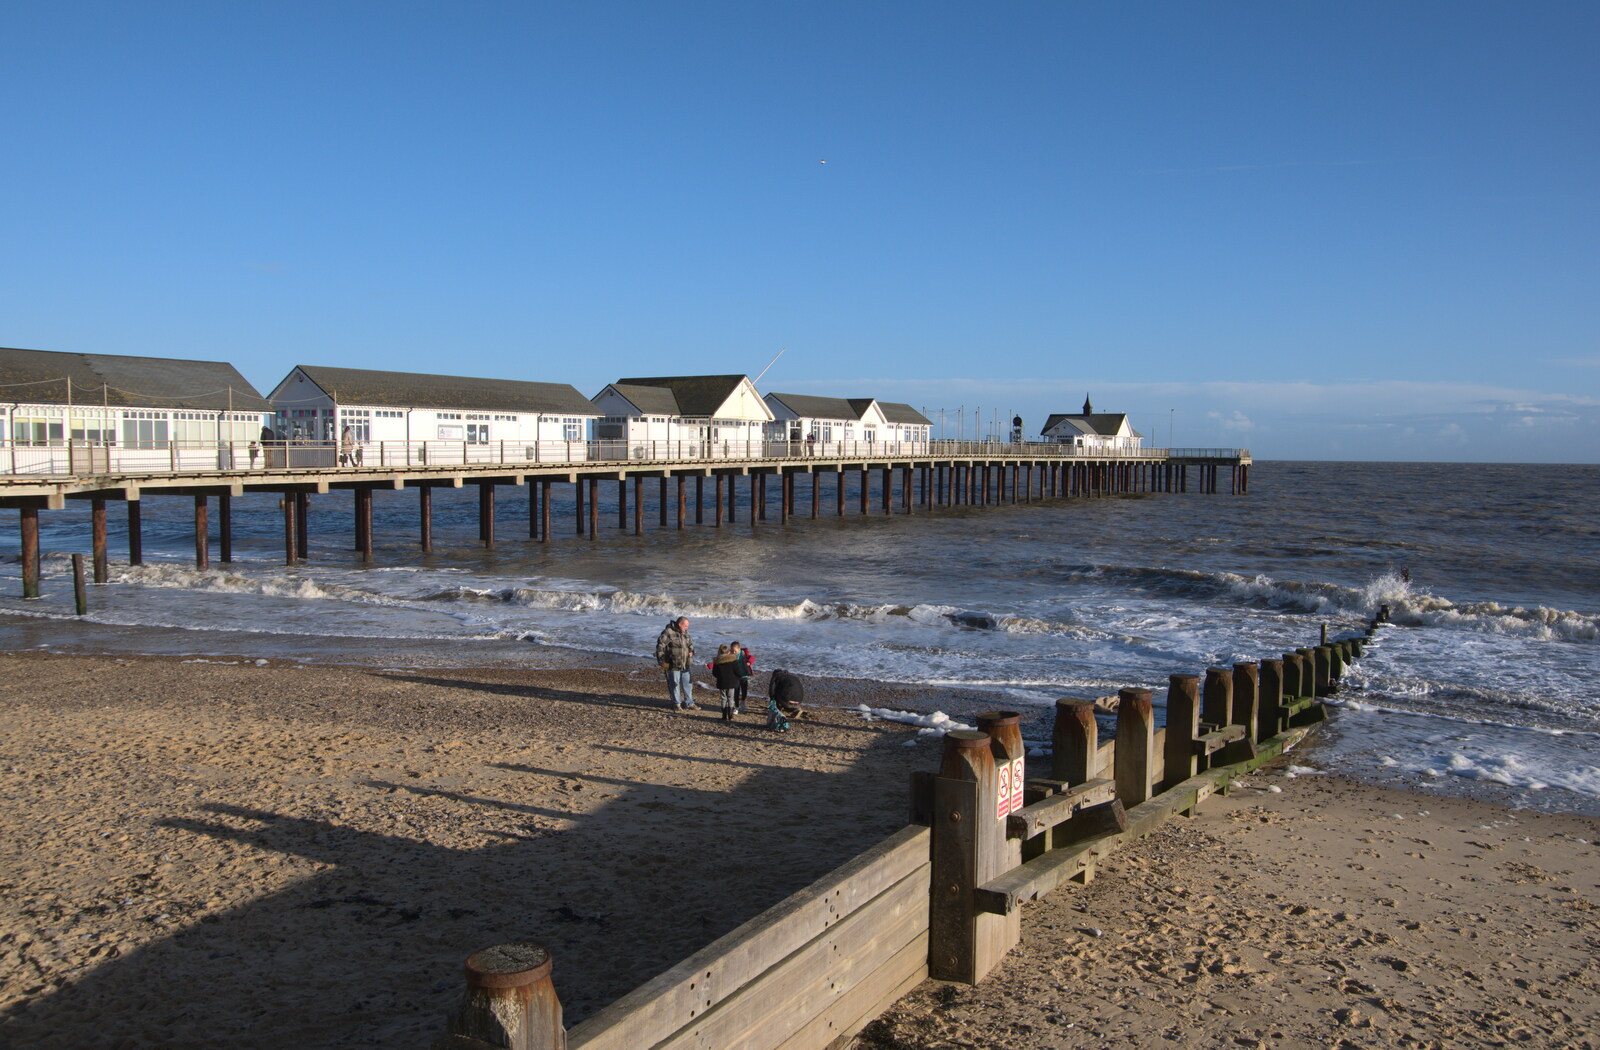 A return to Southwold pier from A Return to the Beach, Southwold, Suffolk - 20th December 2020